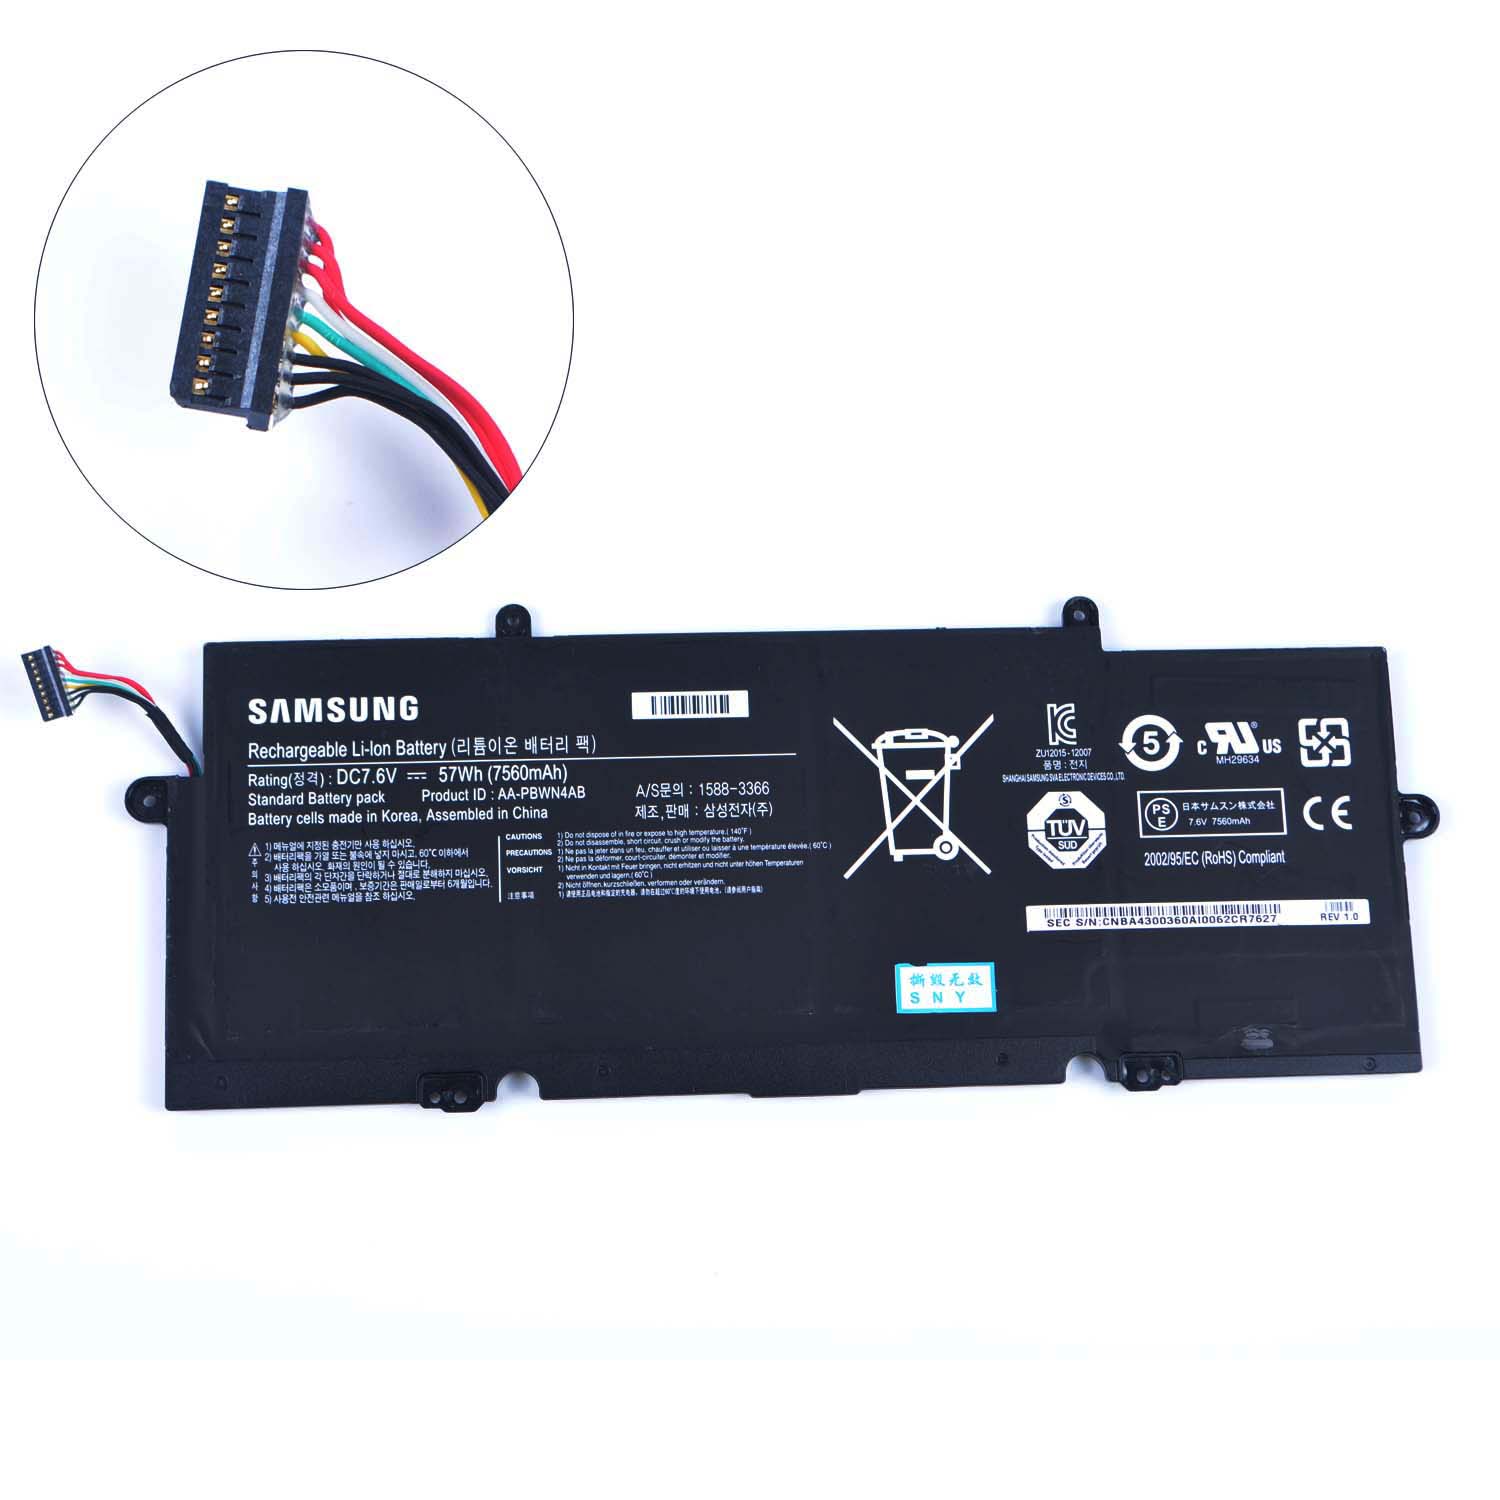 Replacement Battery for Samsung Samsung 740U3E battery